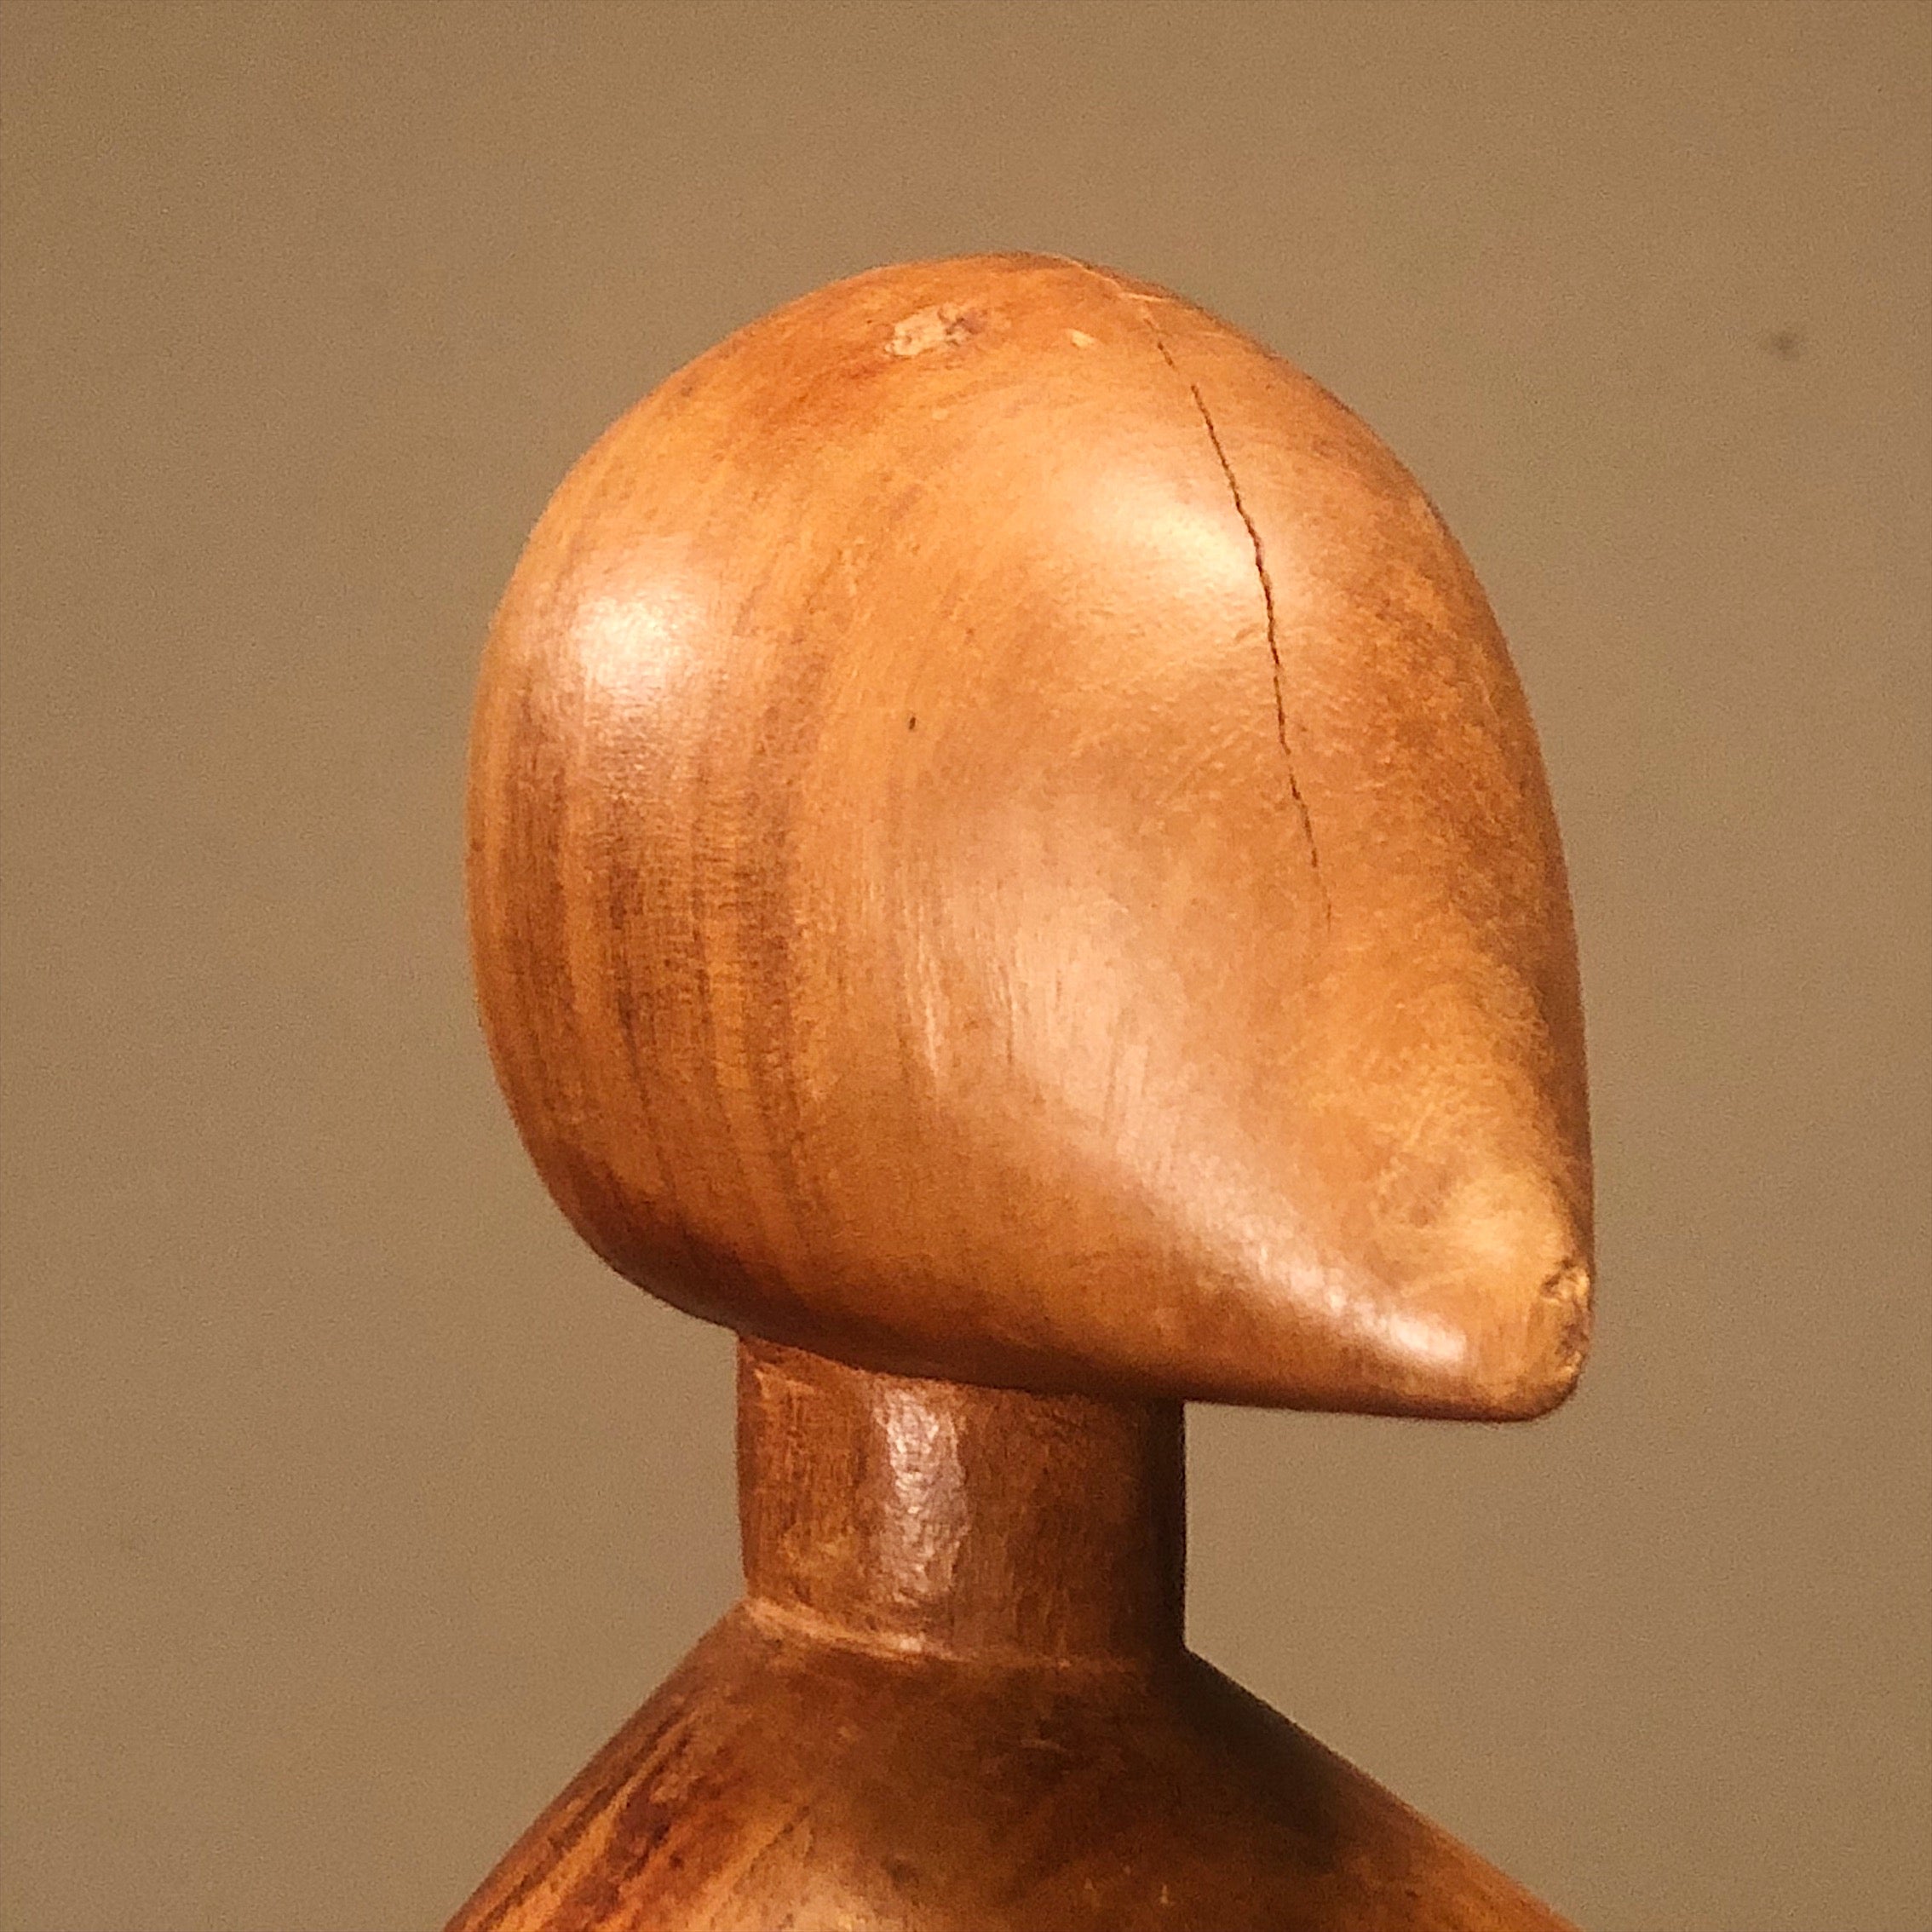 Indentation on Unusual Mod Wood Sculpture of Human Form from 1950s